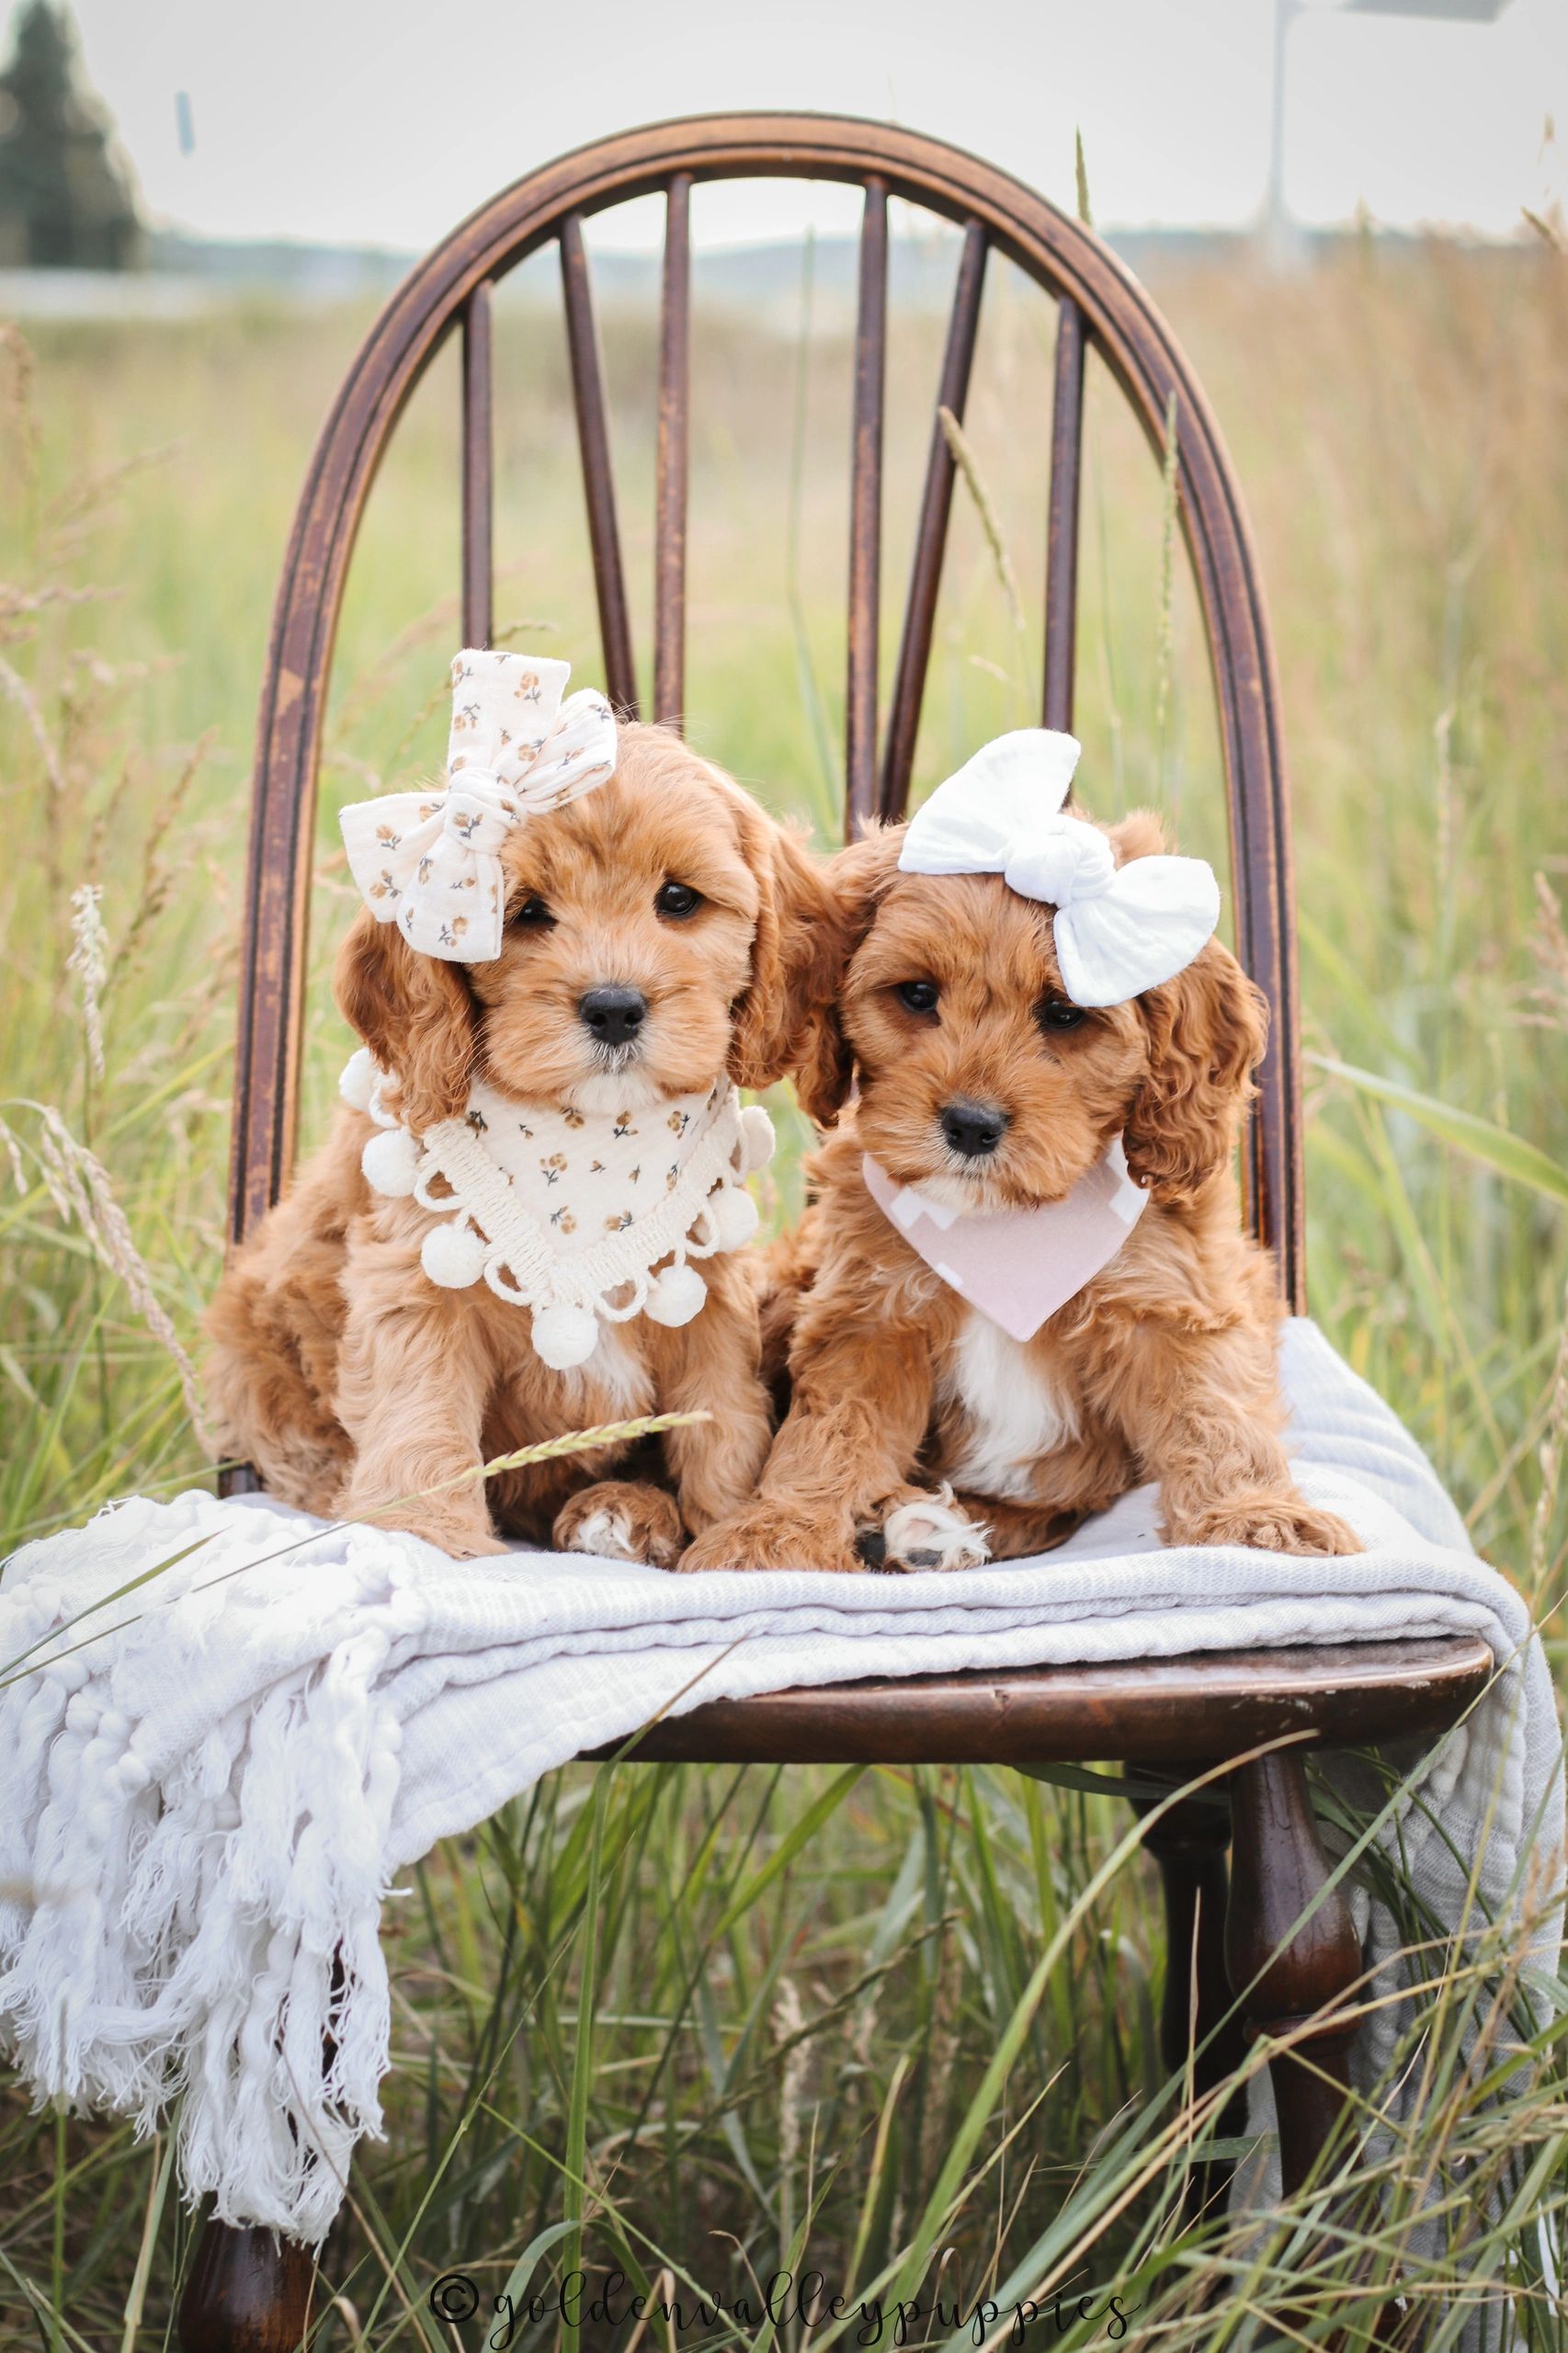 Cavapoo for sale, Cavapoo Puppies for Sale, Cavapoo Breeders, Puppy for Sale, Cavapoo Puppy